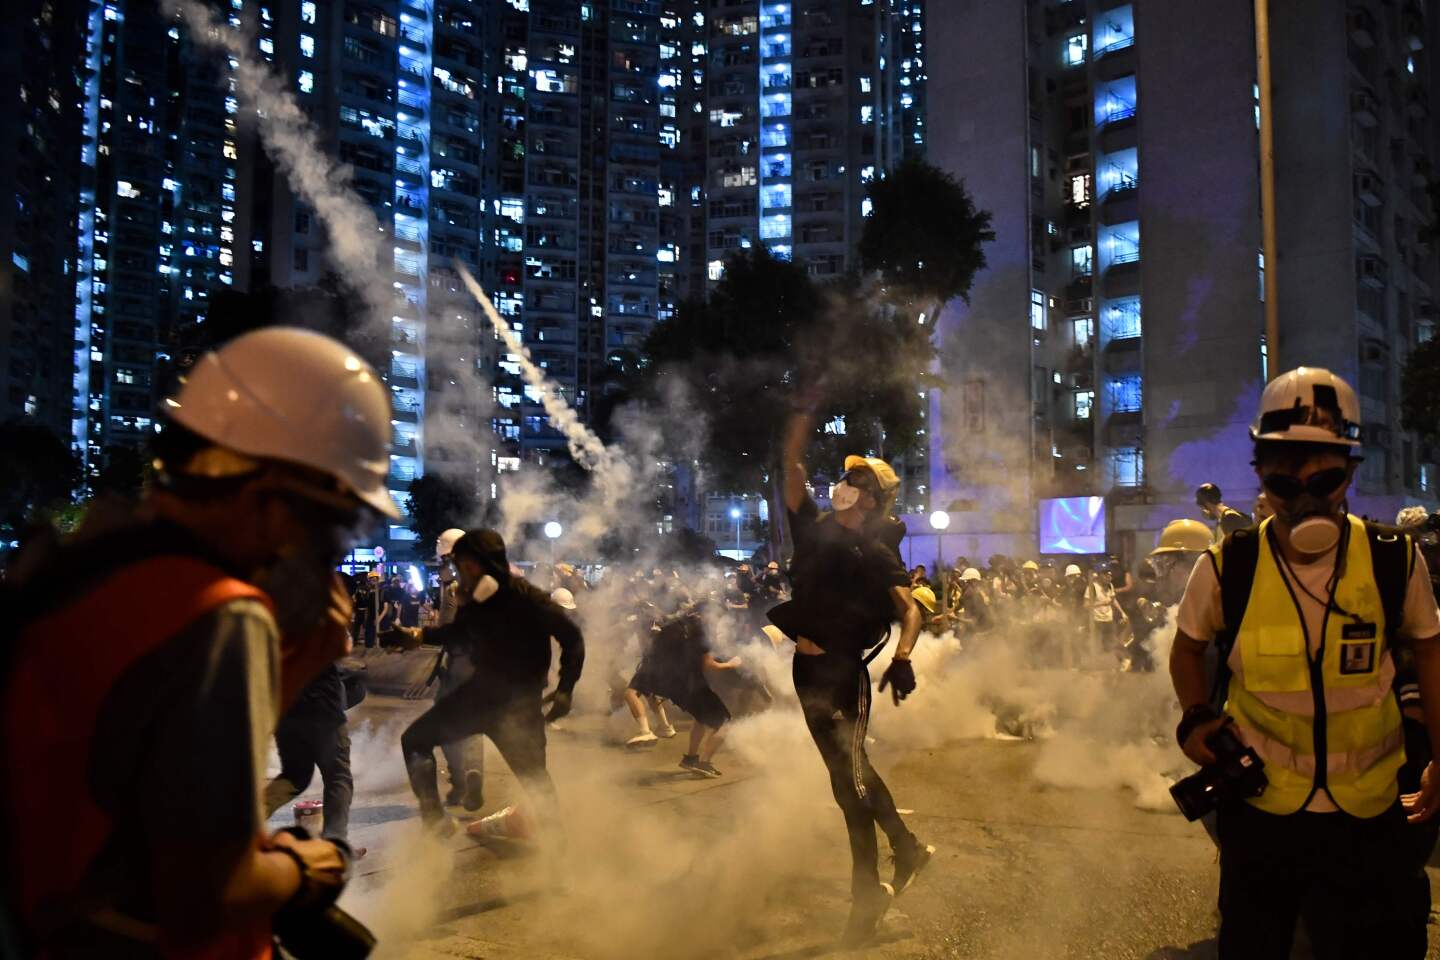 Unrest and chaos in Hong Kong